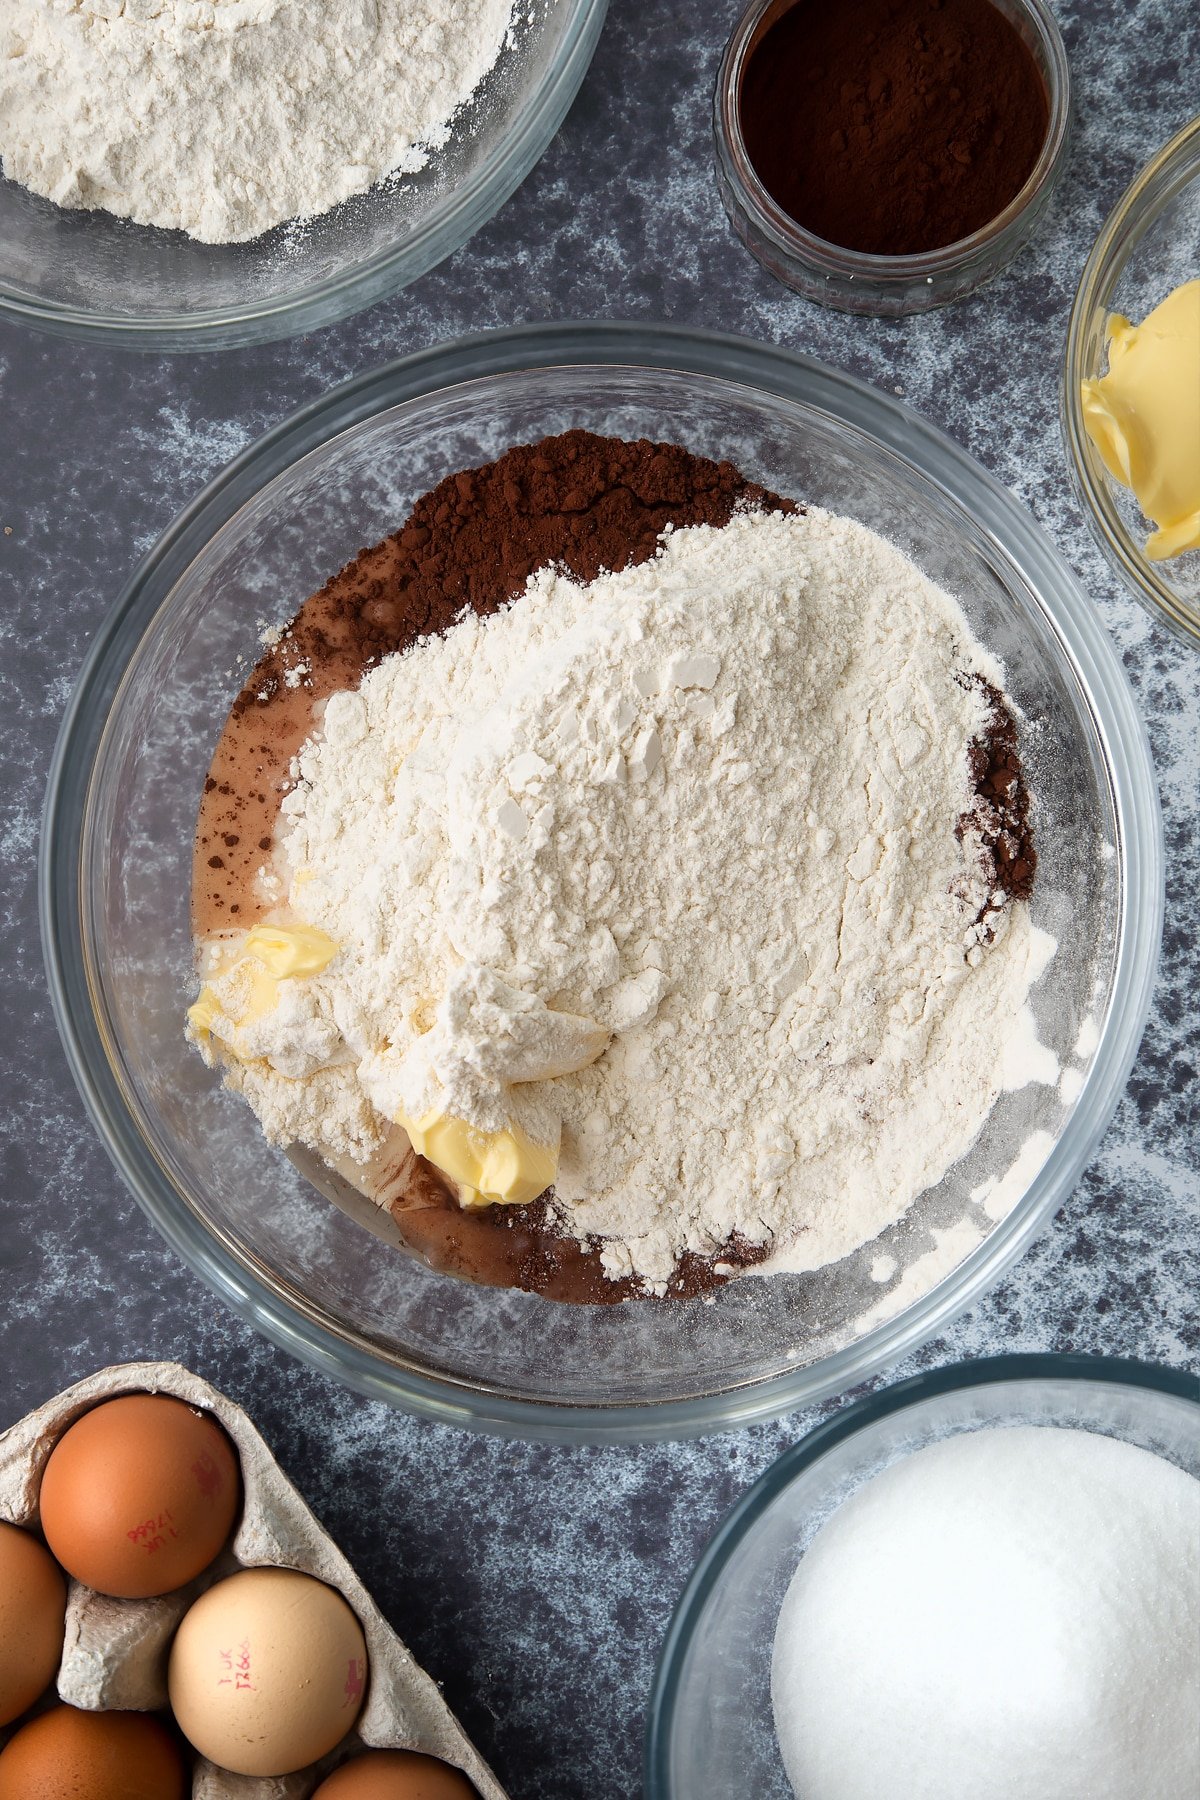 Margarine, oil, caster sugar, milk, cocoa, eggs and self-raising flour in a large mixing bowl. Ingredients to make gory Halloween cupcakes surround the bowl.